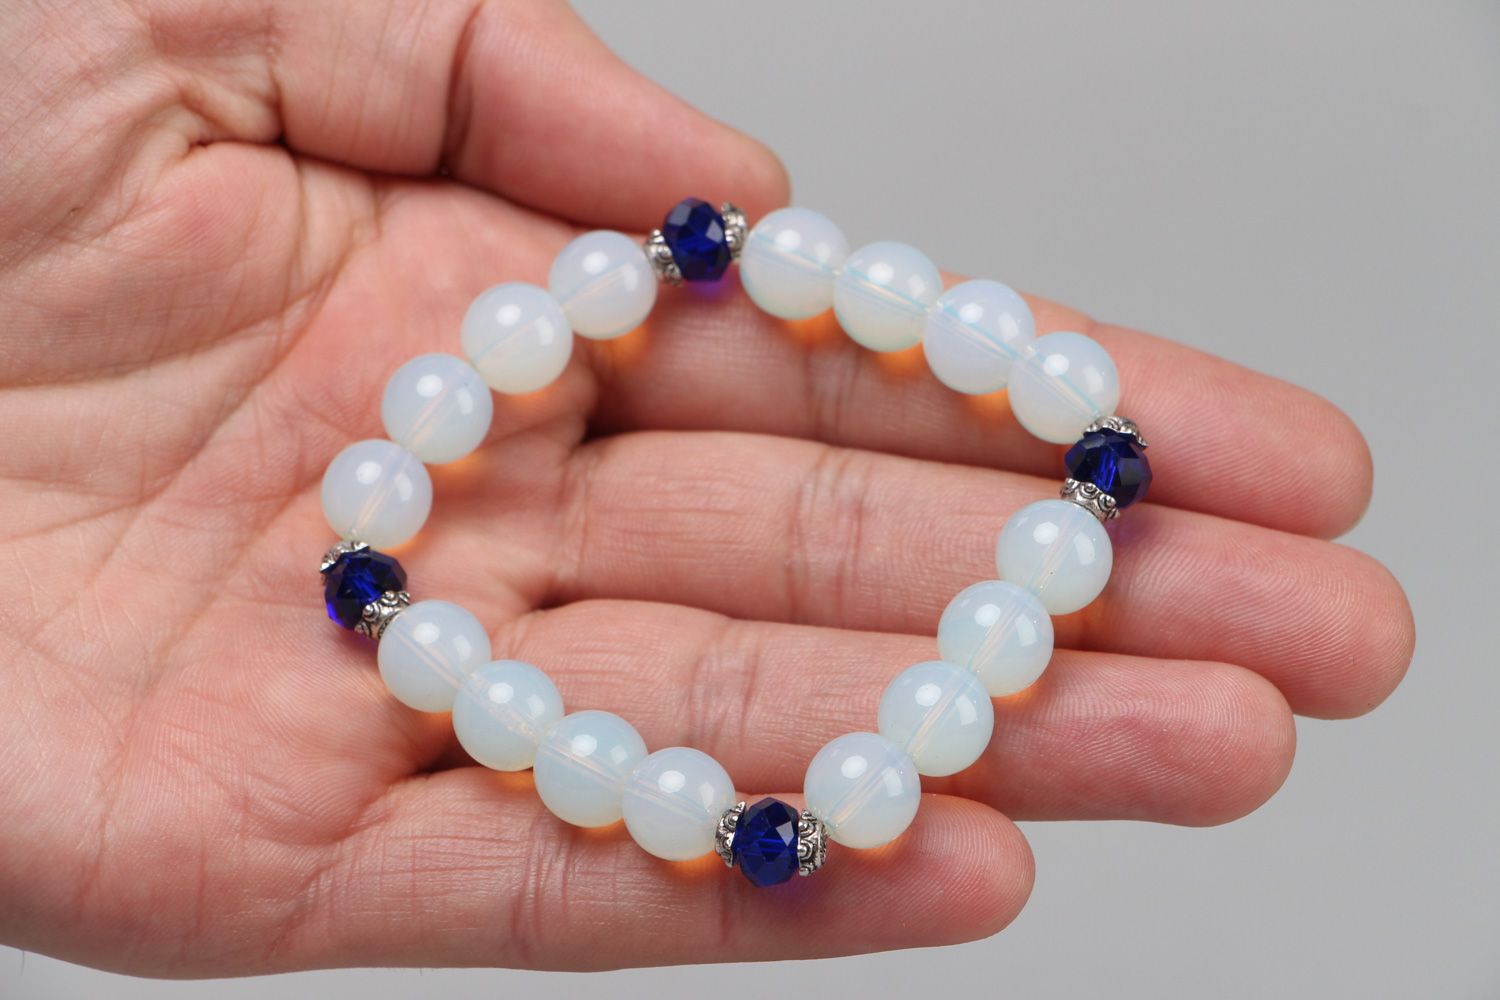 Handmade stretch wrist bracelet with moon stone and blue glass beads for women photo 3